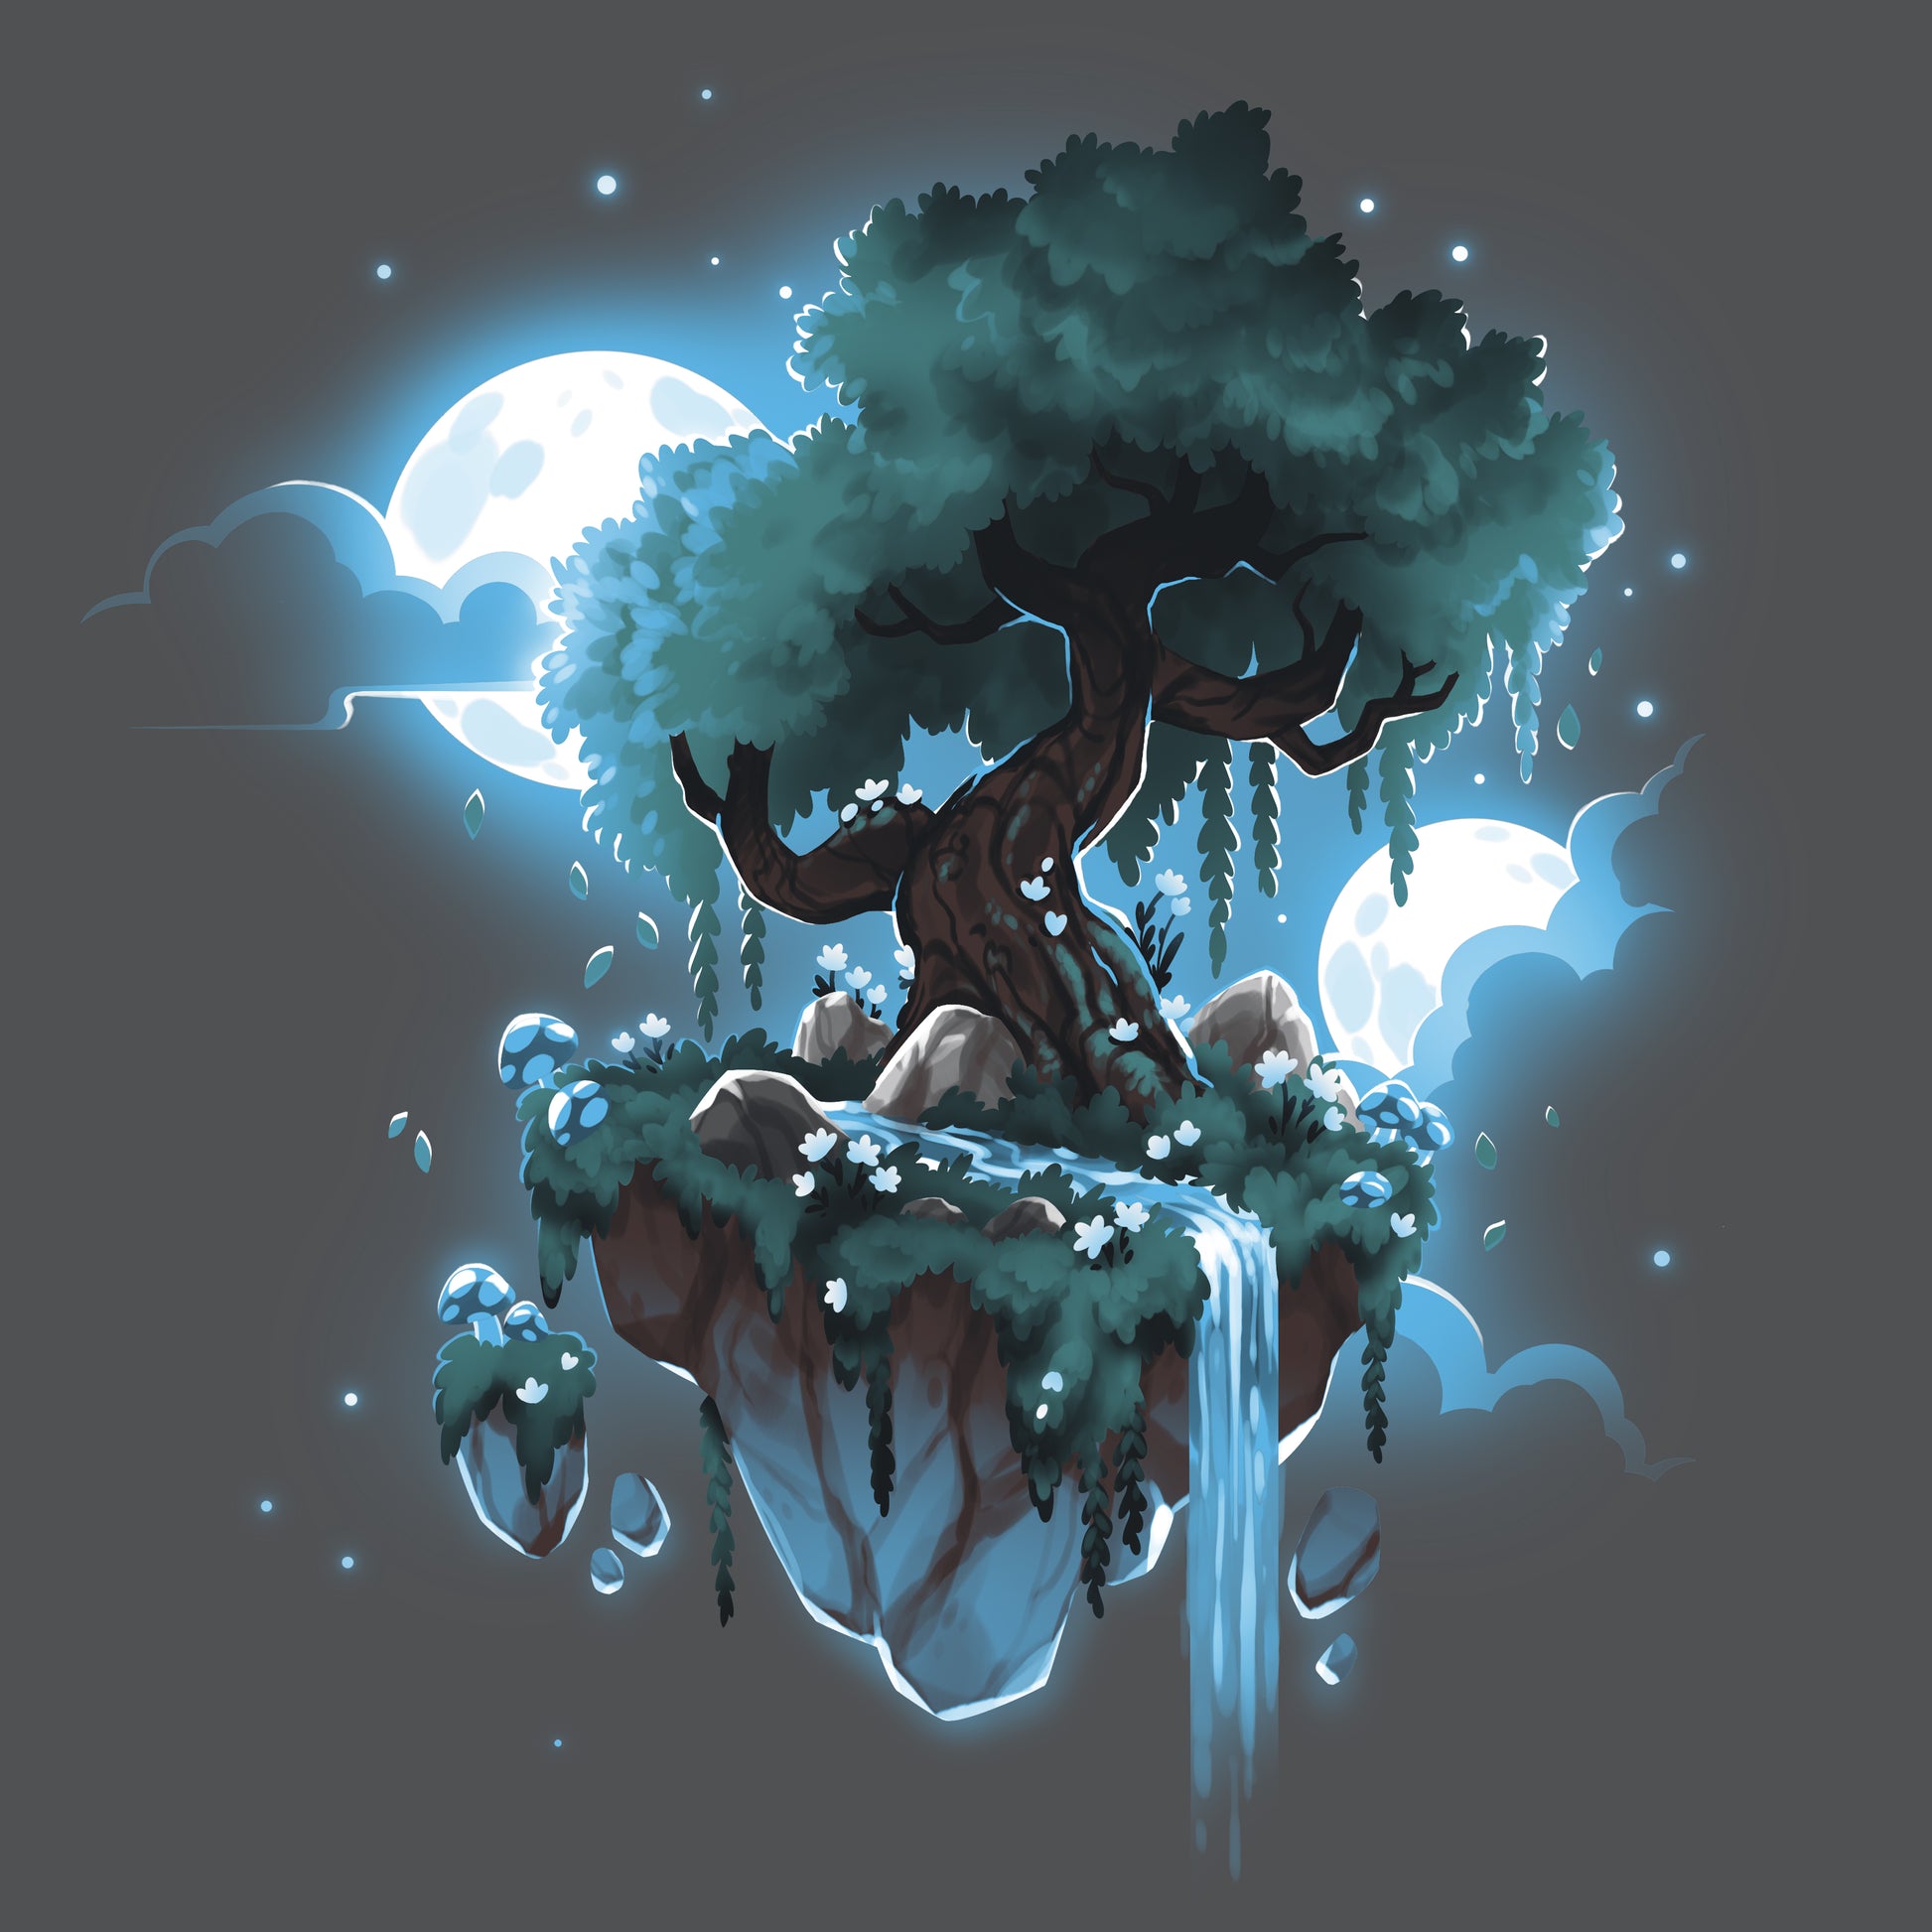 A mystical illustration of an island with a comforting tree, perfect for a TeeTurtle T-shirt design featuring the Mystical Floating Tree.